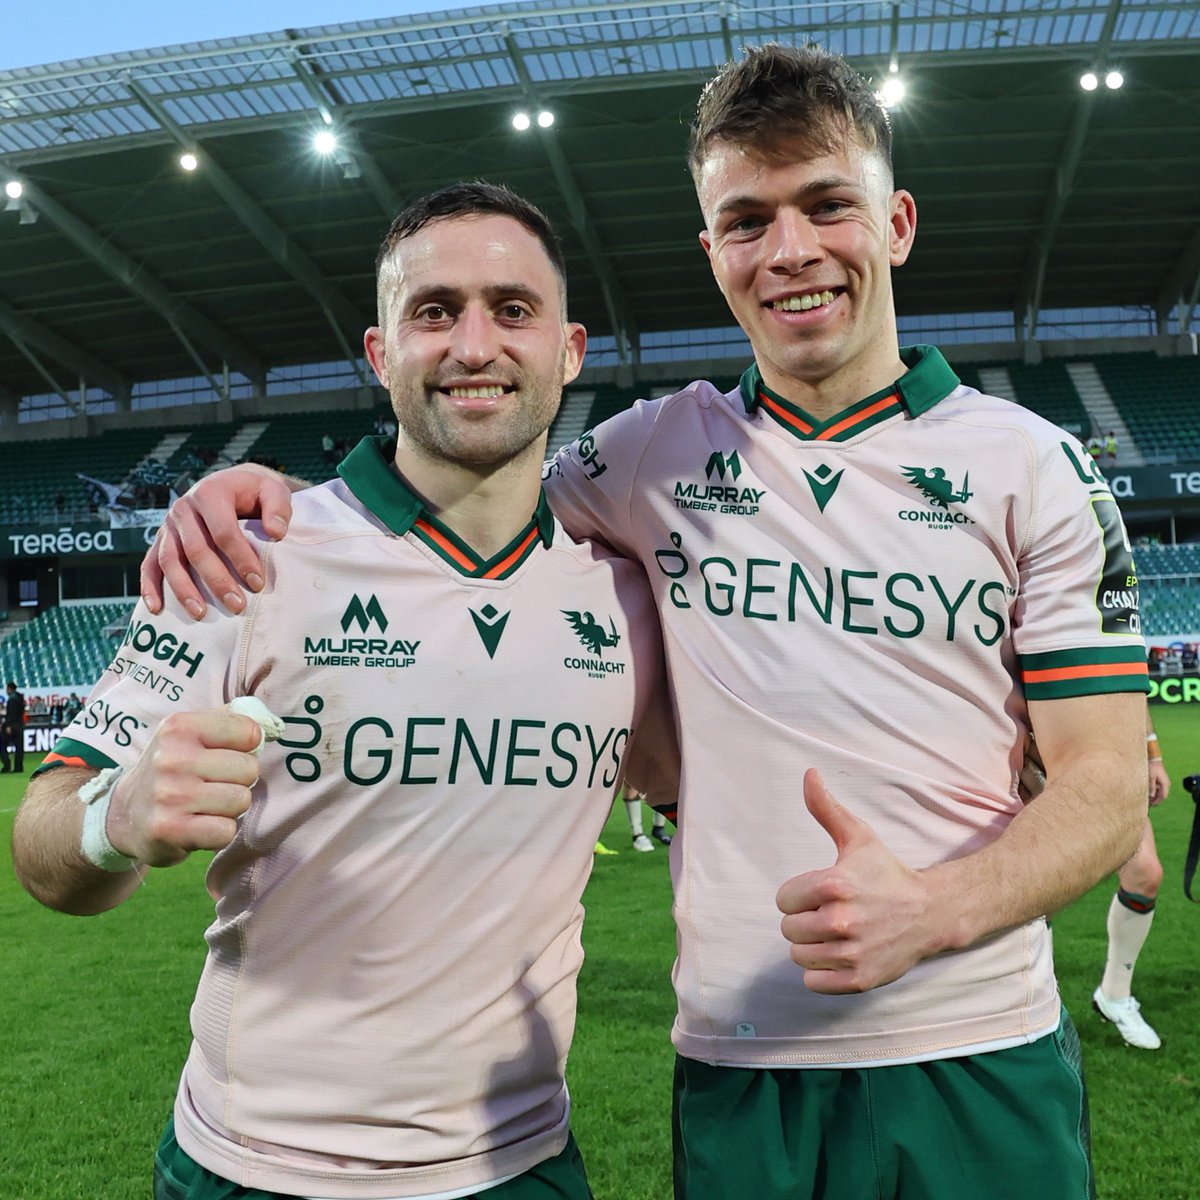 𝙈𝙖𝙩𝙩𝙝𝙚𝙬 𝘿𝙚𝙫𝙞𝙣𝙚 🟢🦅 2020 - Schools Senior Cup winner with @CGarbally 🏆 2022 - Grand Slam winner with @IrishRugby U20s ☘️ 2024 - Connacht debut v Lyon 🏉🇫🇷 2024 - Signs first Pro contract ✍️ #ConnachtRugby | Read more: connachtrugby.ie/news/matthew-d…